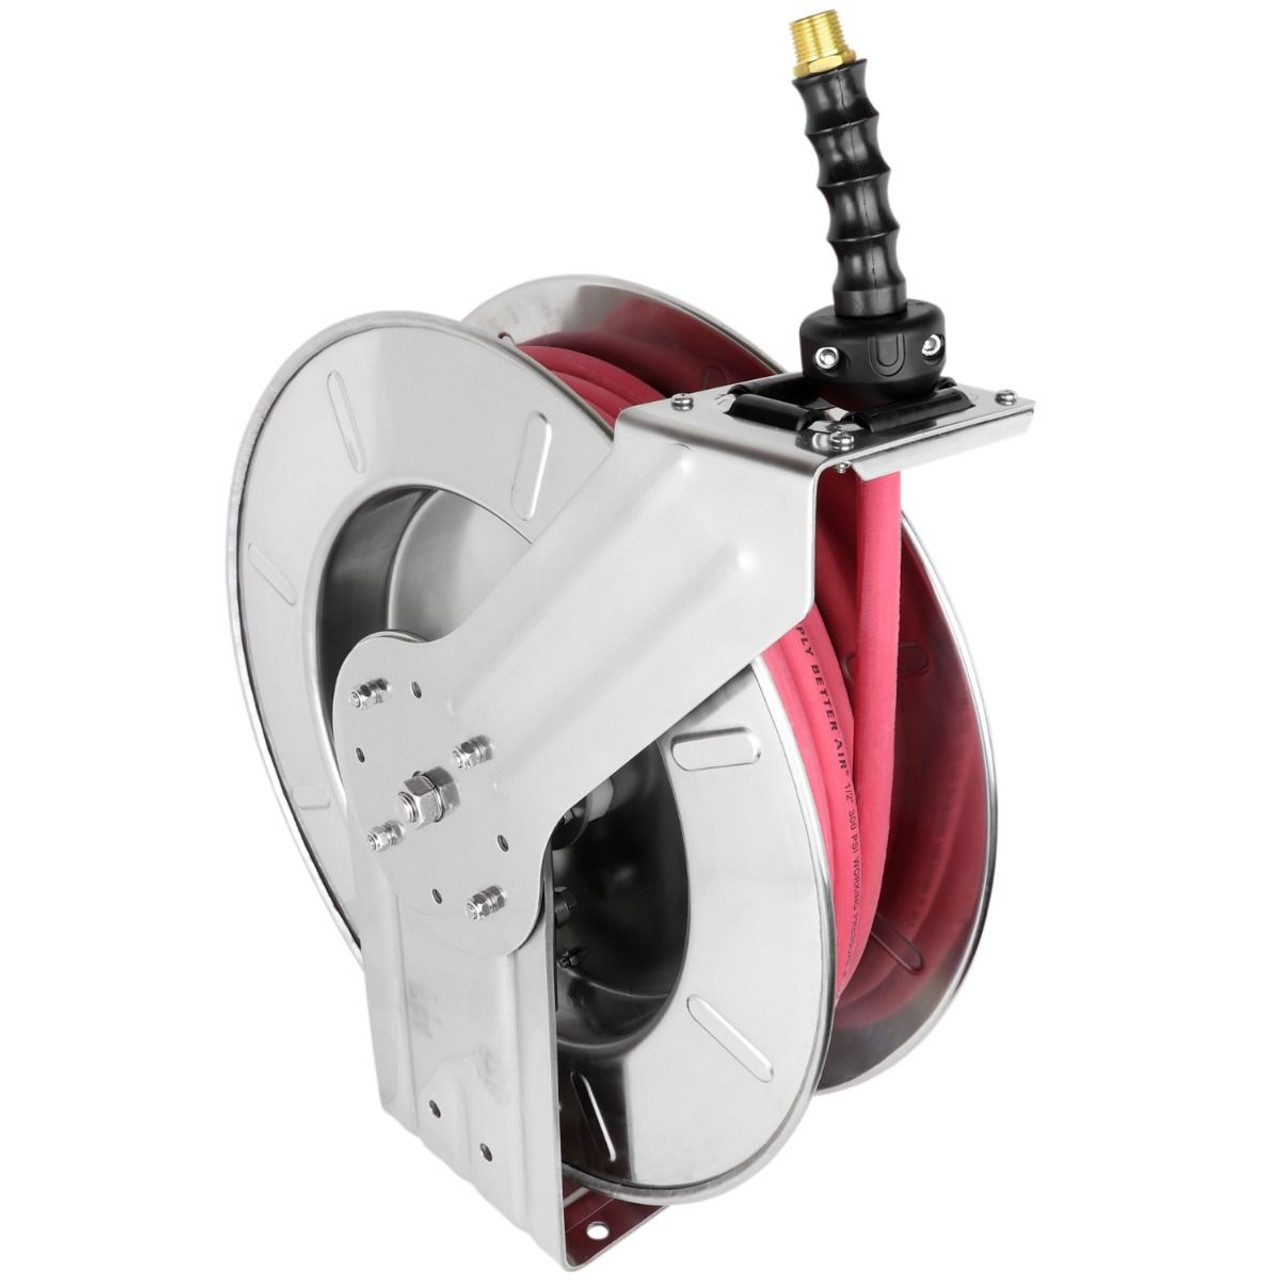 Milton? Industrial Stainless Steel Hose Reel Retractable, 3/8" ID x 25' Ultra-Lightweight Rubber hose w/ 3/8" NPT, 300 PSI